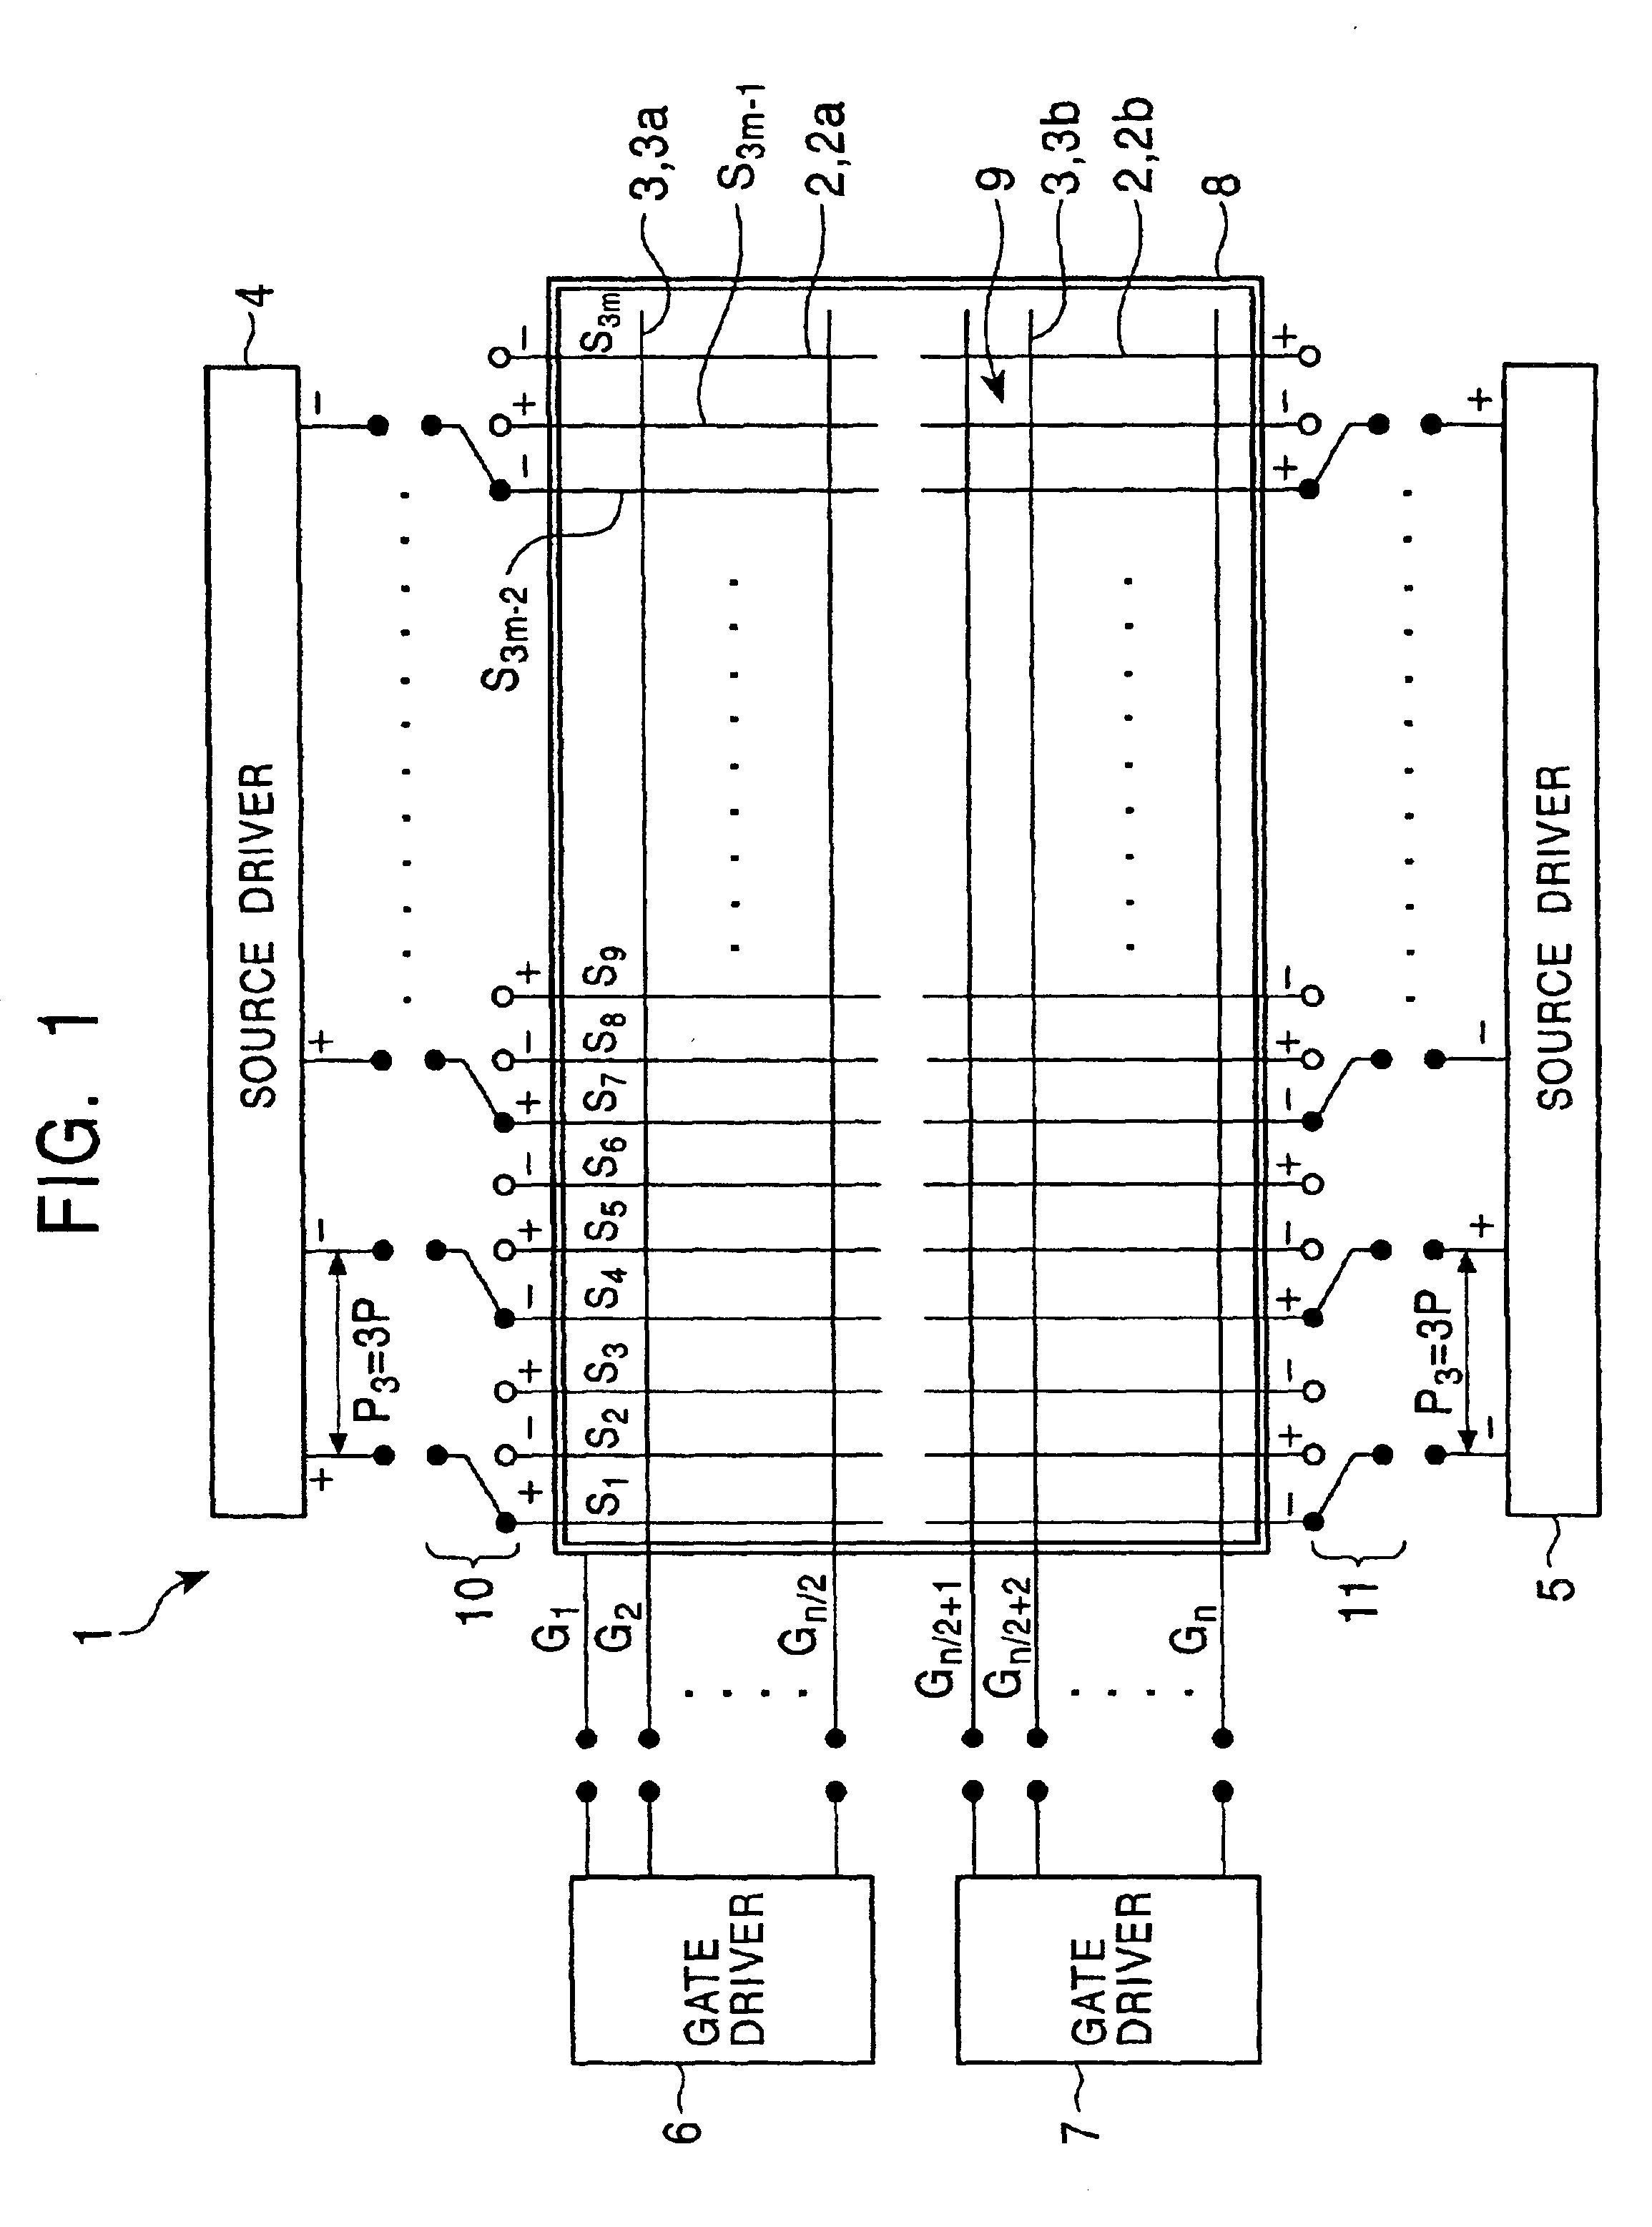 Active-matrix liquid crystal display suitable for high-definition display, and driving method thereof